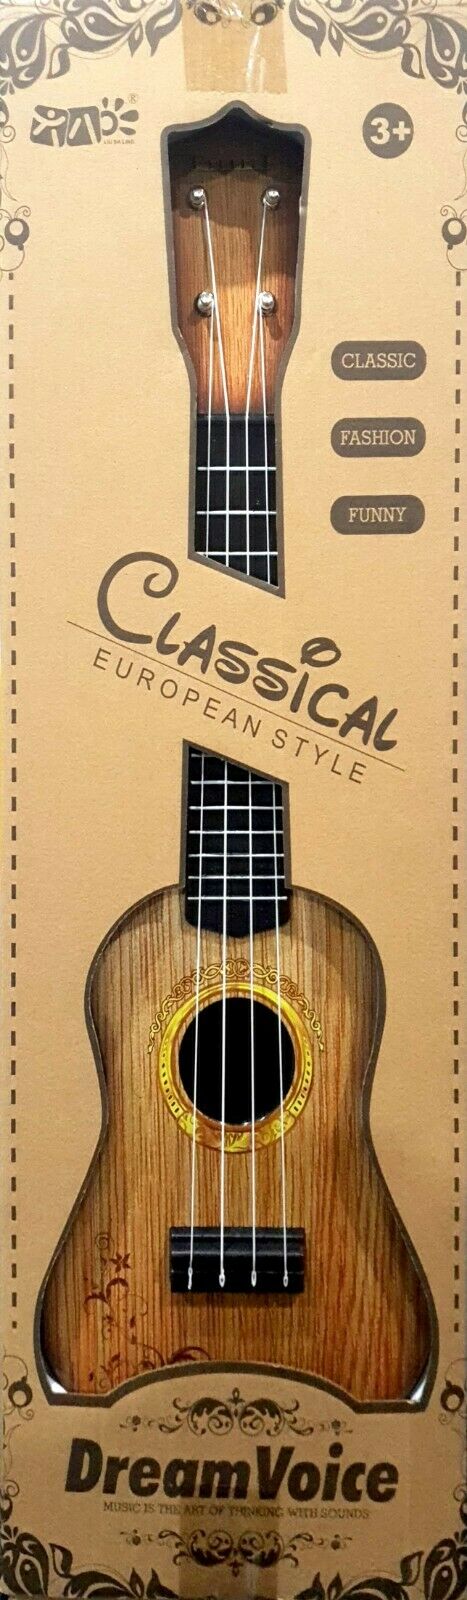 23inches children kids wooden acoustic guitar